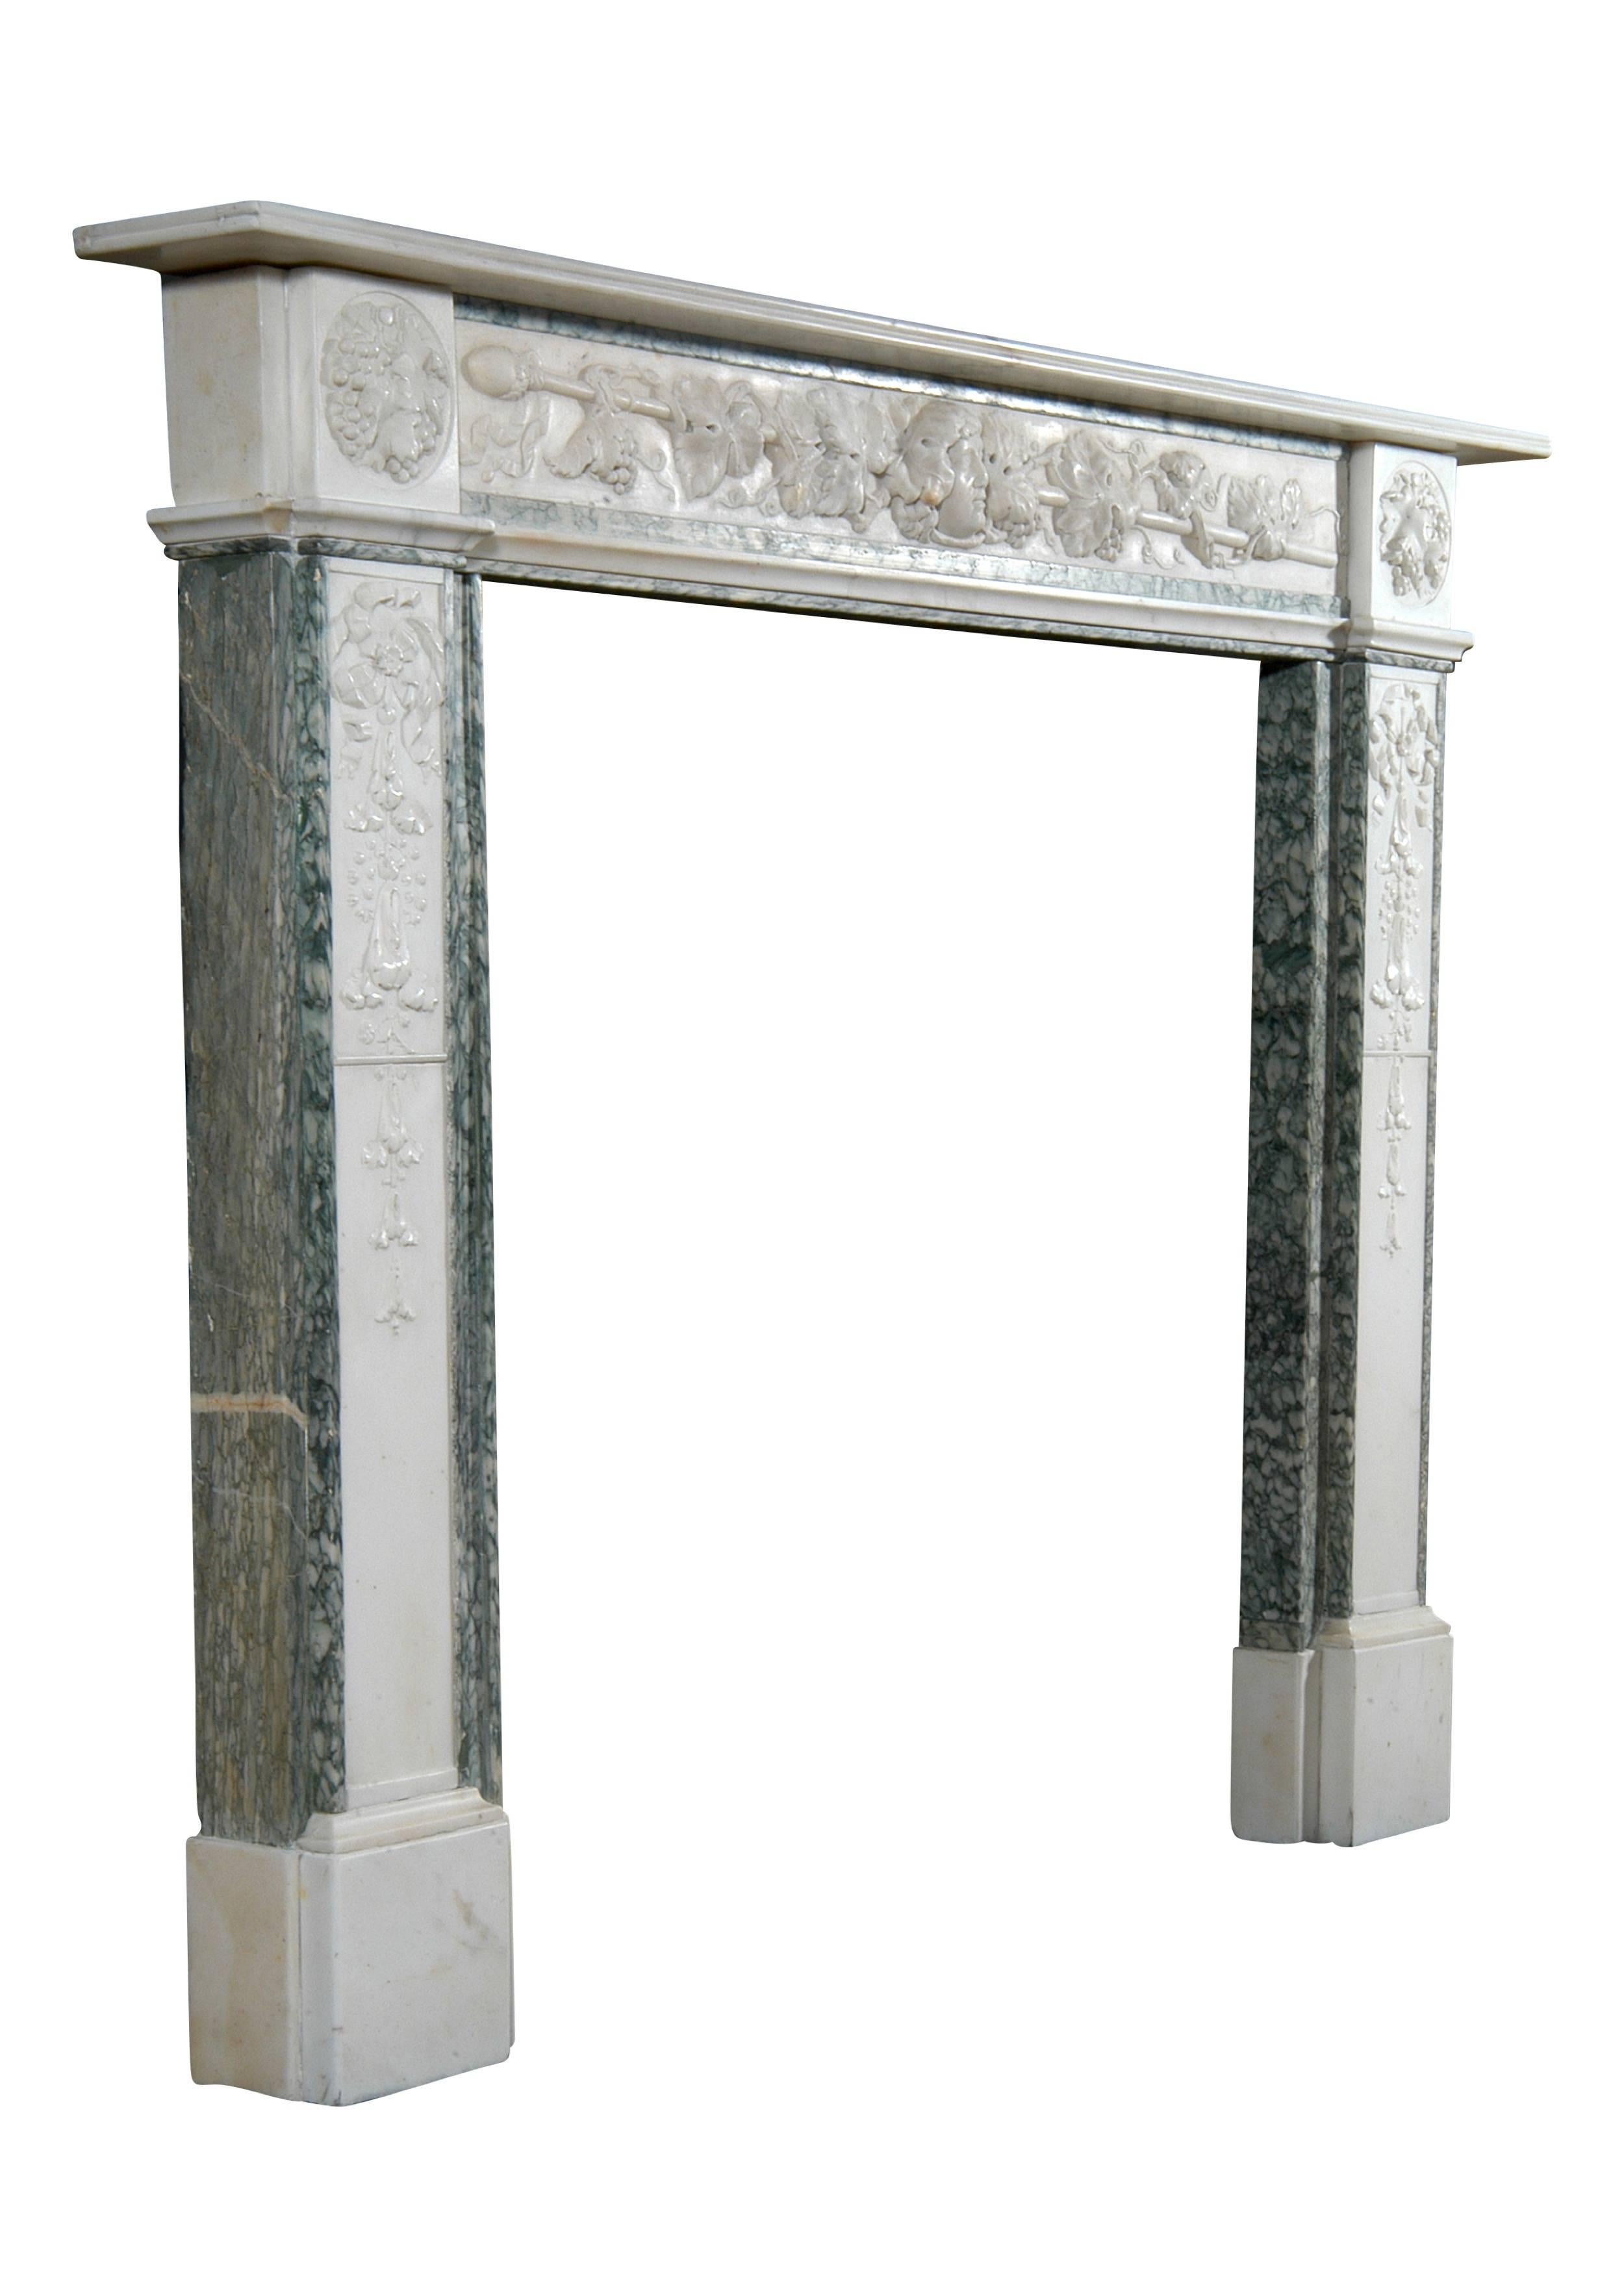 French Provincial 19th Century English Statuary and Vert d'Estours Marble Fireplace